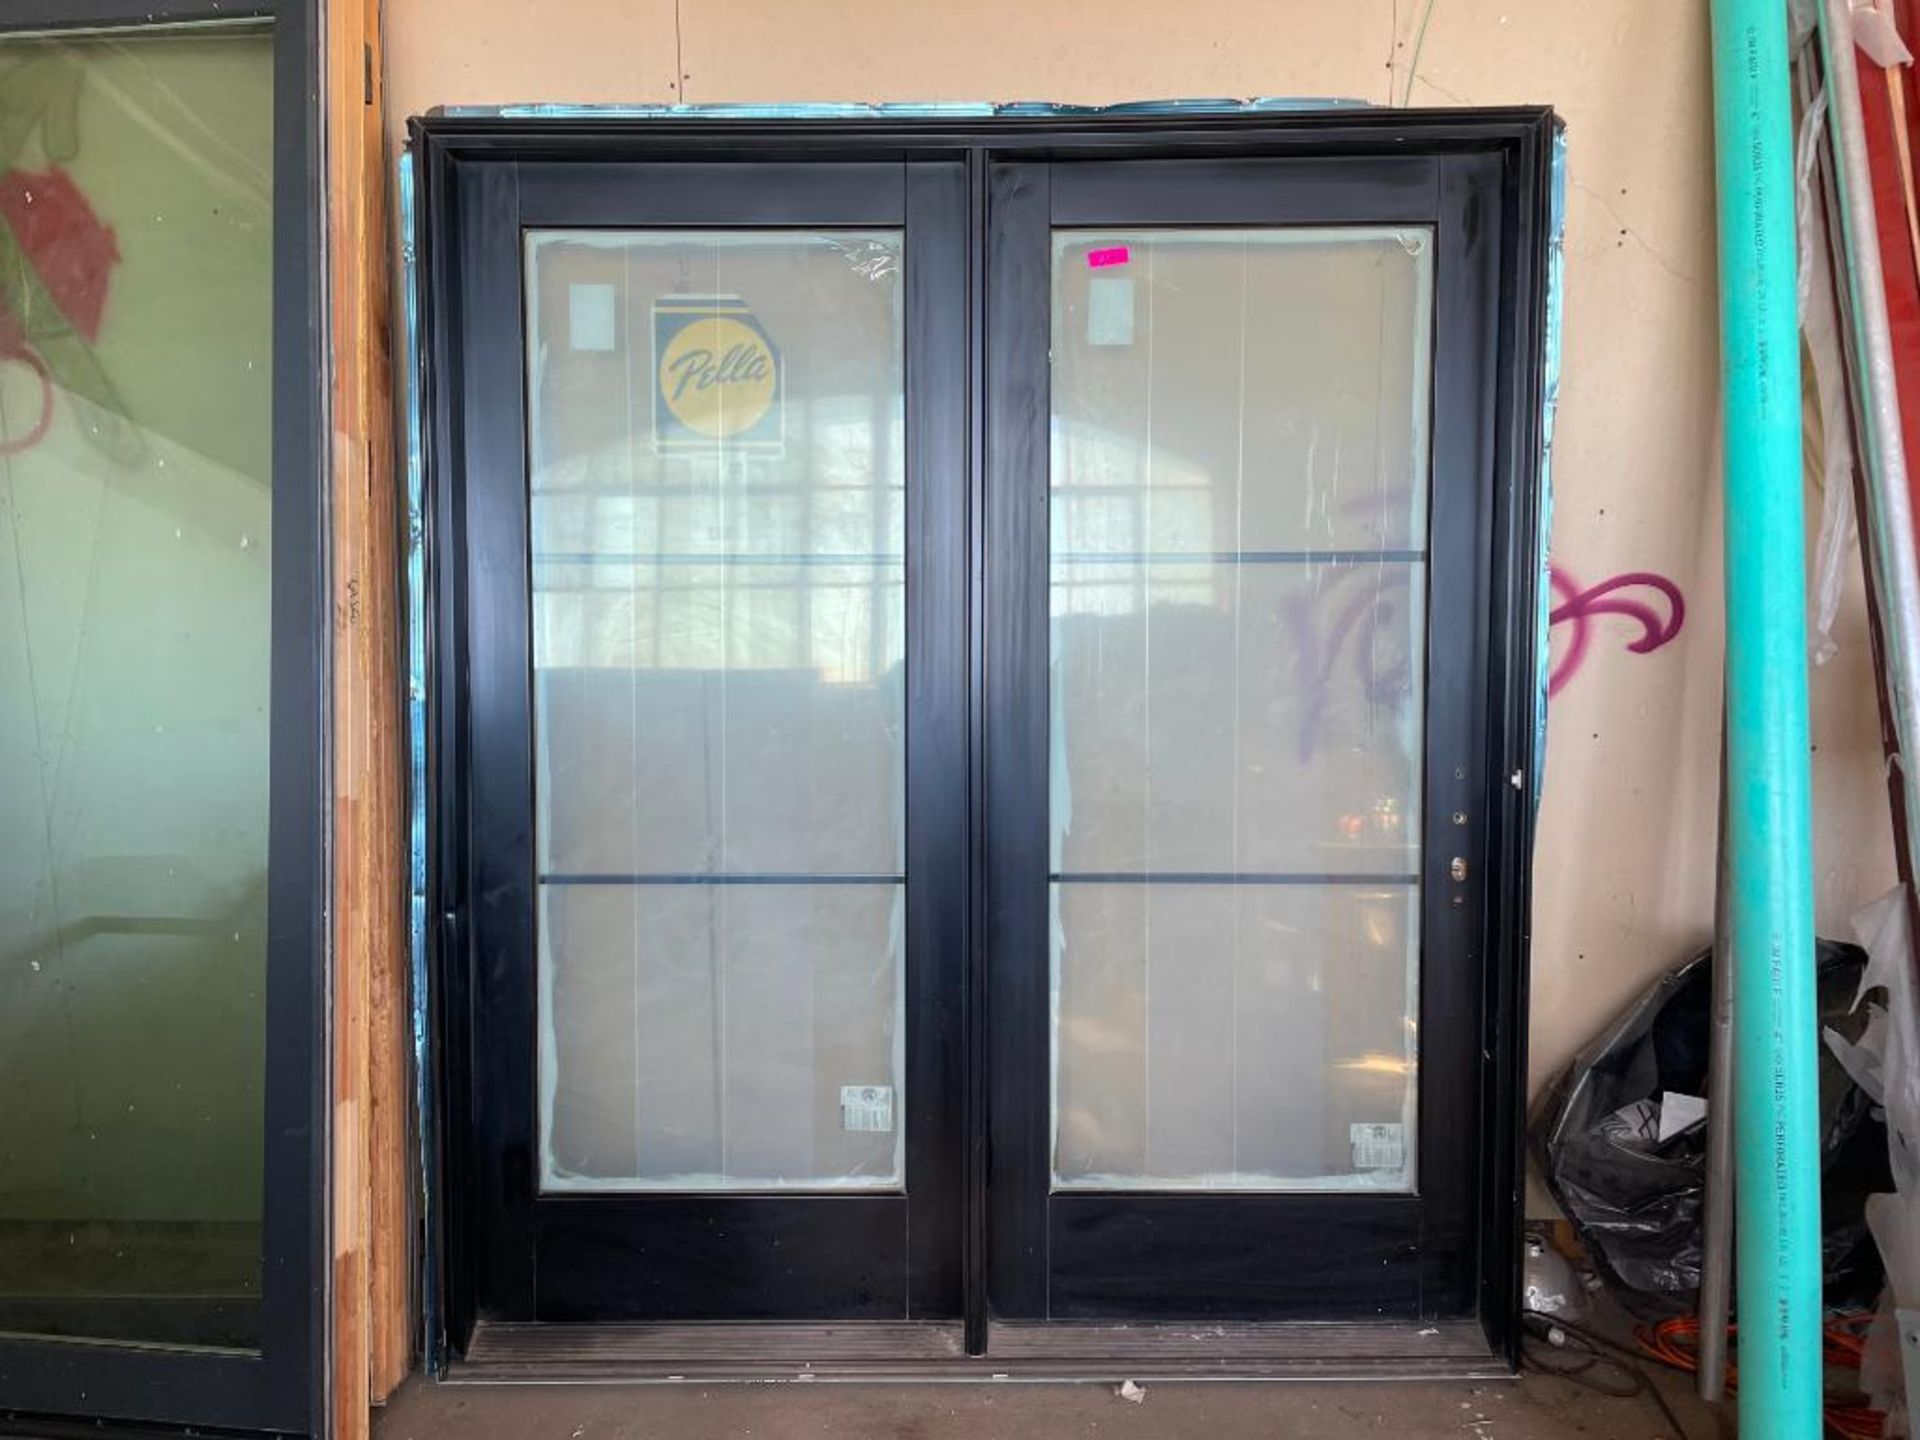 72" X 96" COMMERCIAL GLASS DOOR W/ FRAME BRAND/MODEL: PELLA SIZE: 72" X 96" LOCATION ROOM 1 QTY: 1 - Image 3 of 8